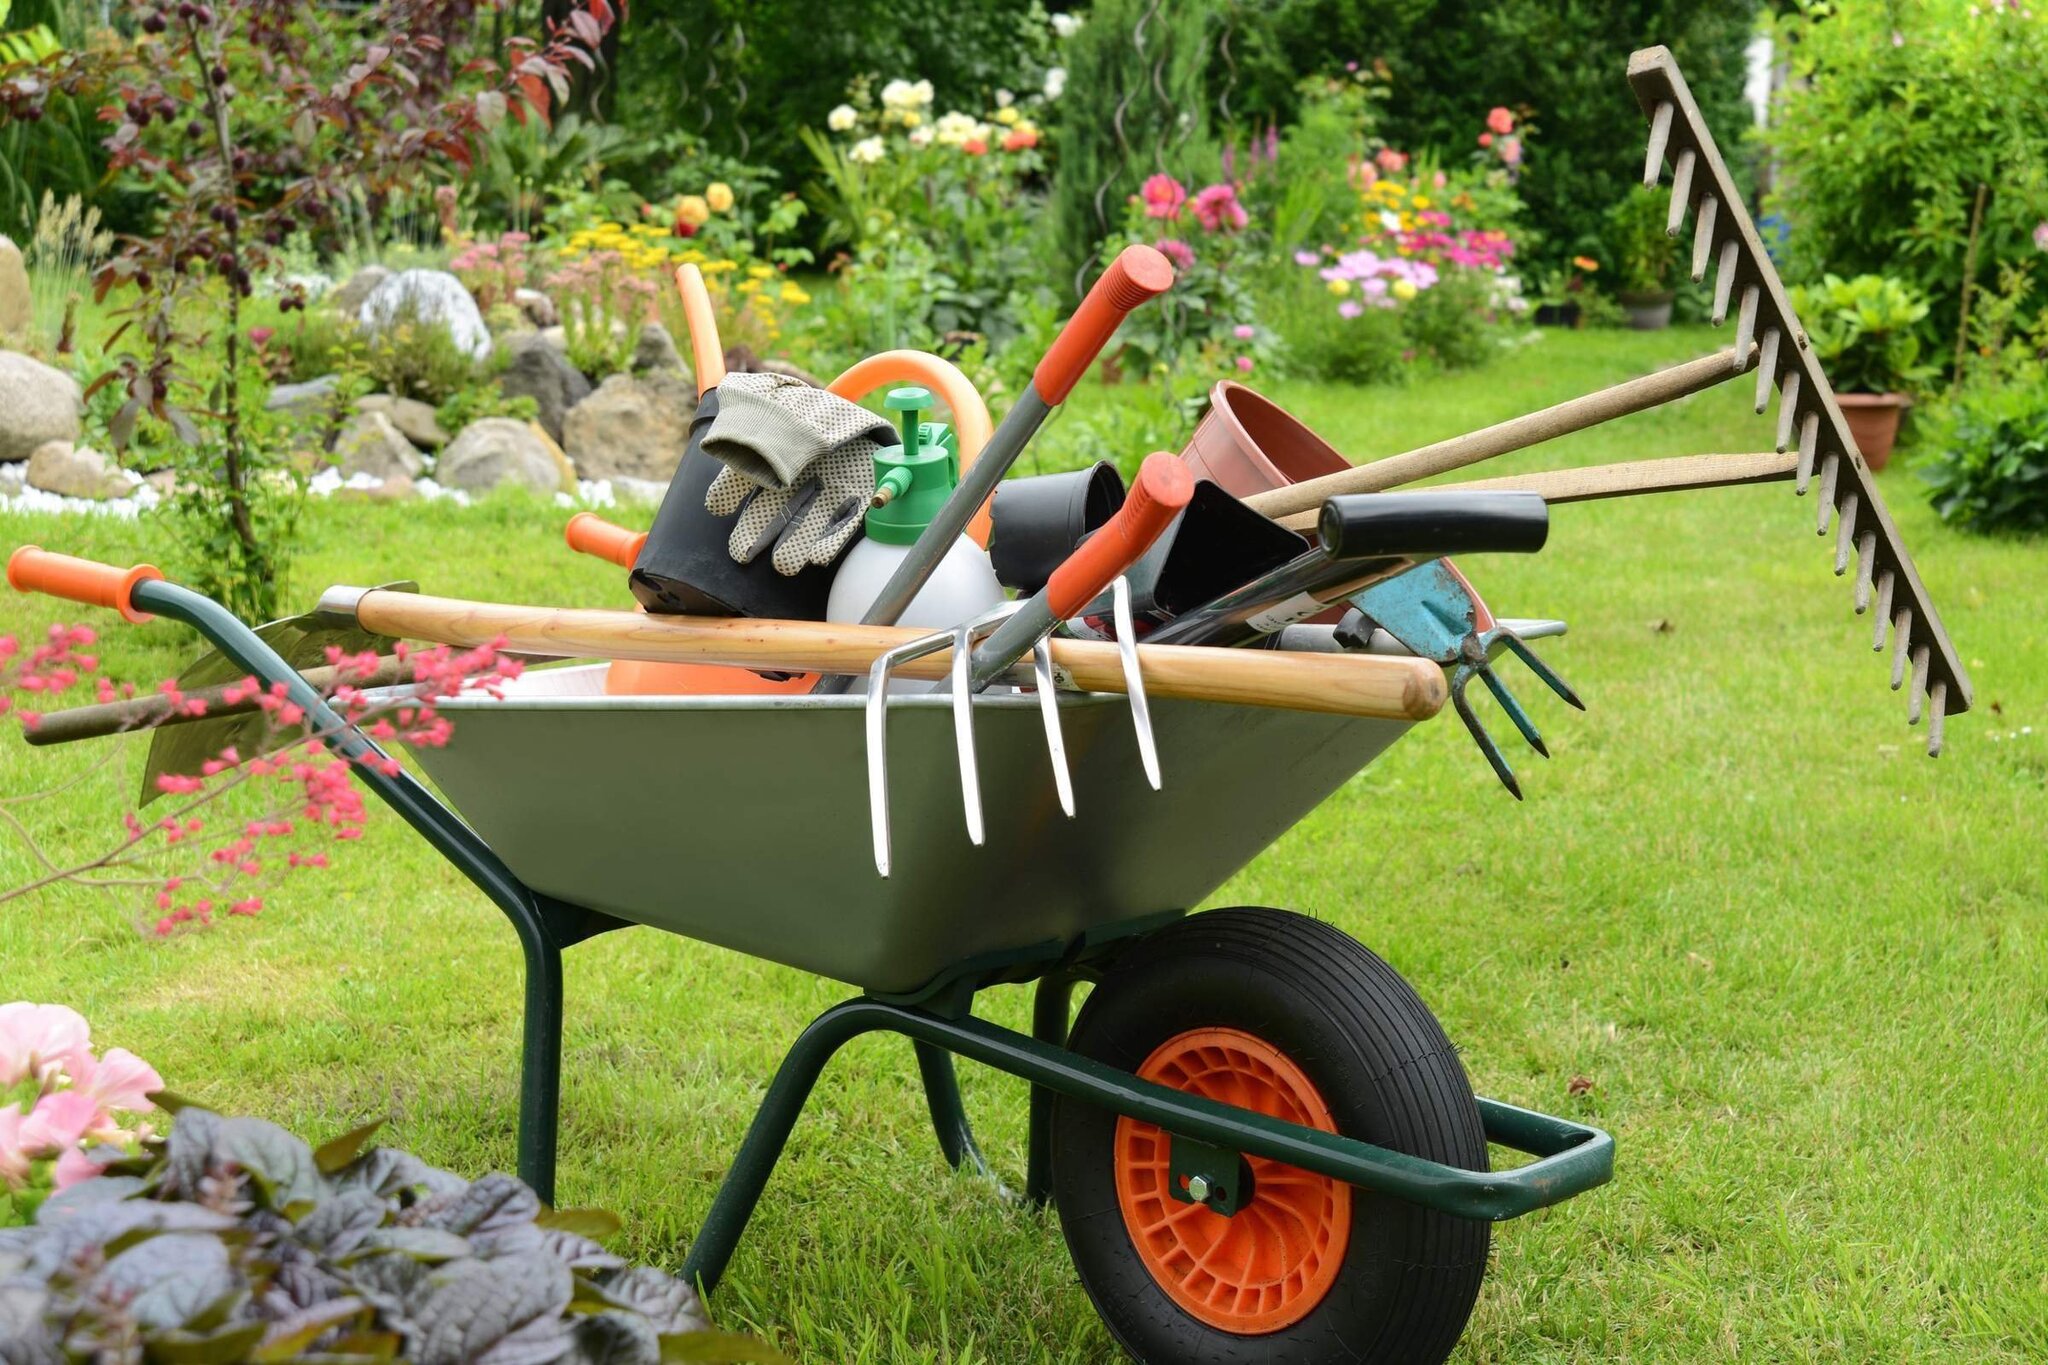 Gardening Tools: How to Choose and Maintain Them in Good Condition